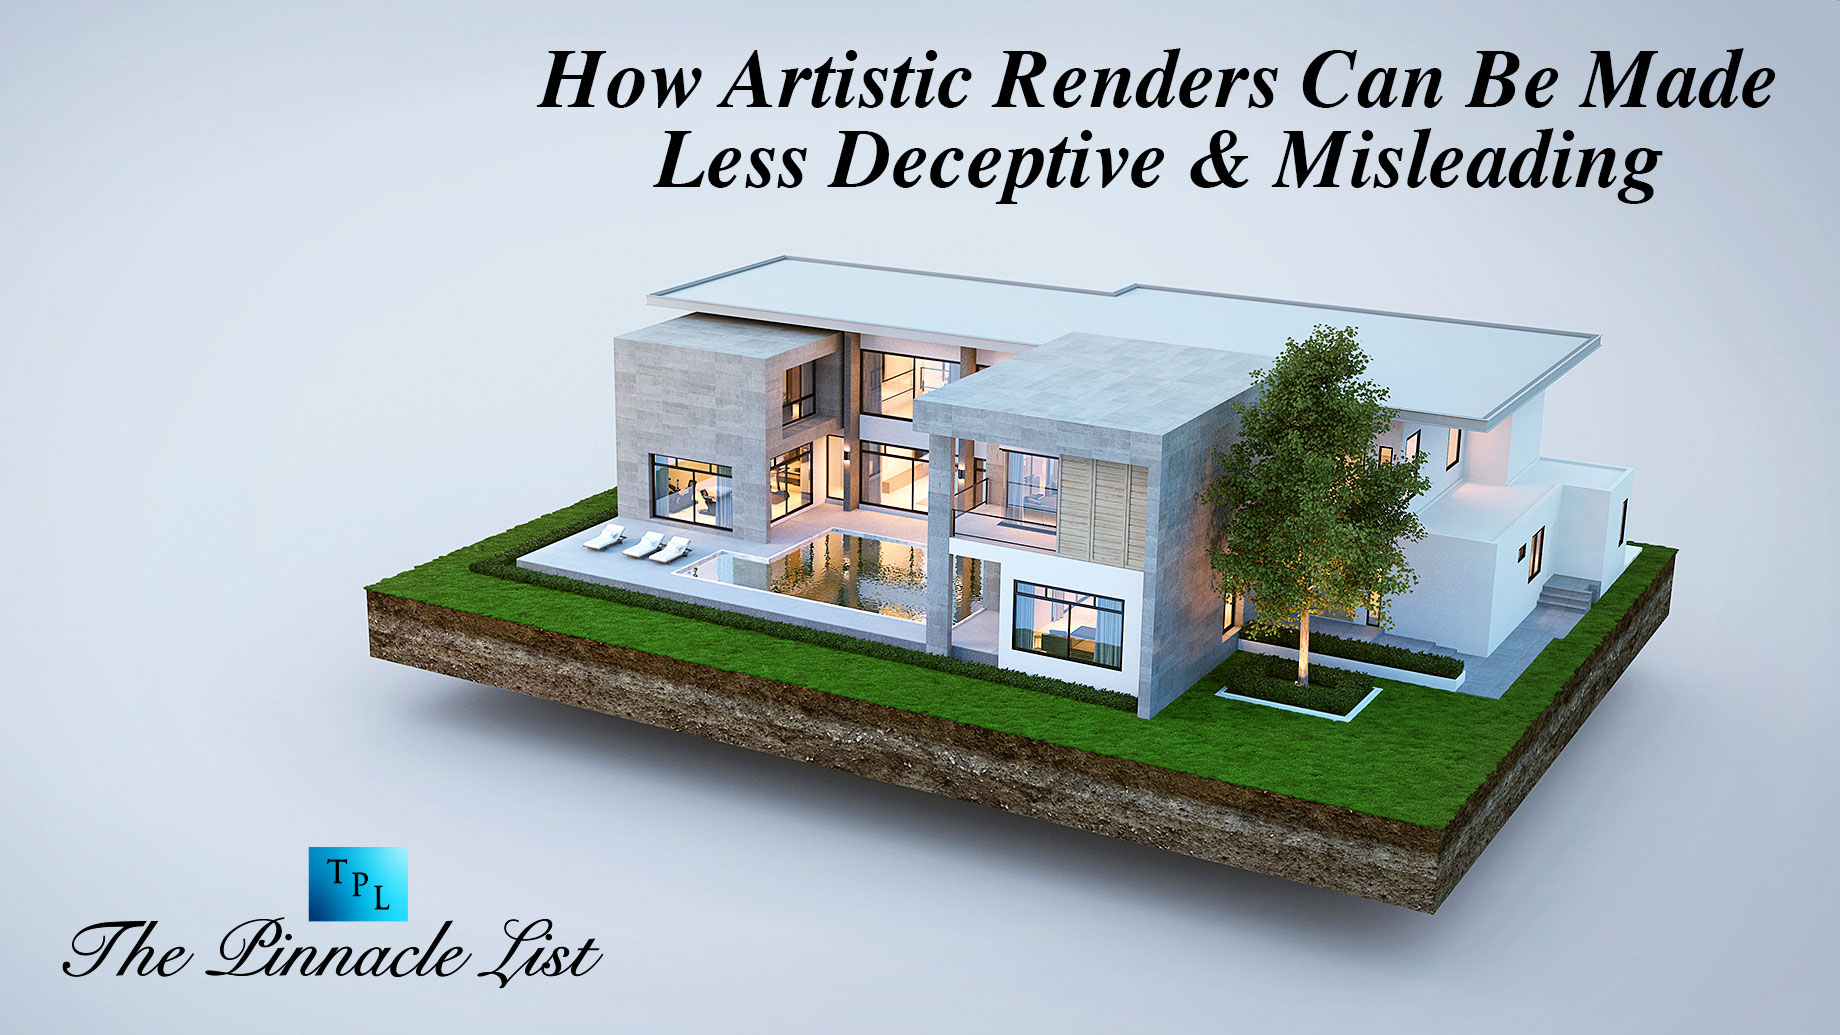 How Artistic Renders Can Be Made Less Deceptive & Misleading